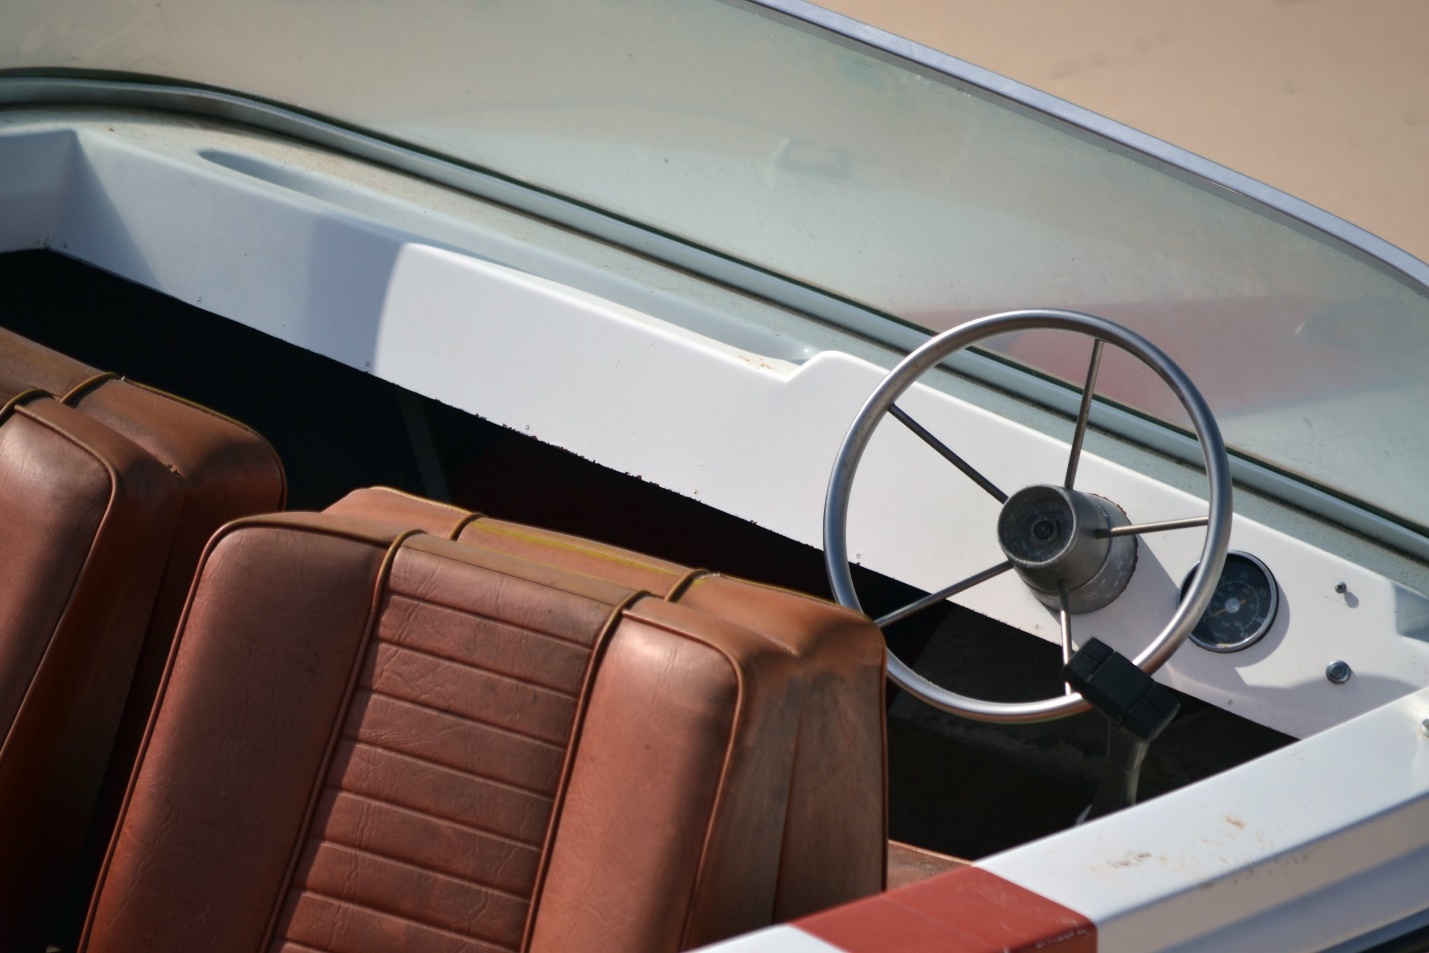 DIY Boat Upholstery Repair: What You'll Need and What Cost to Expect